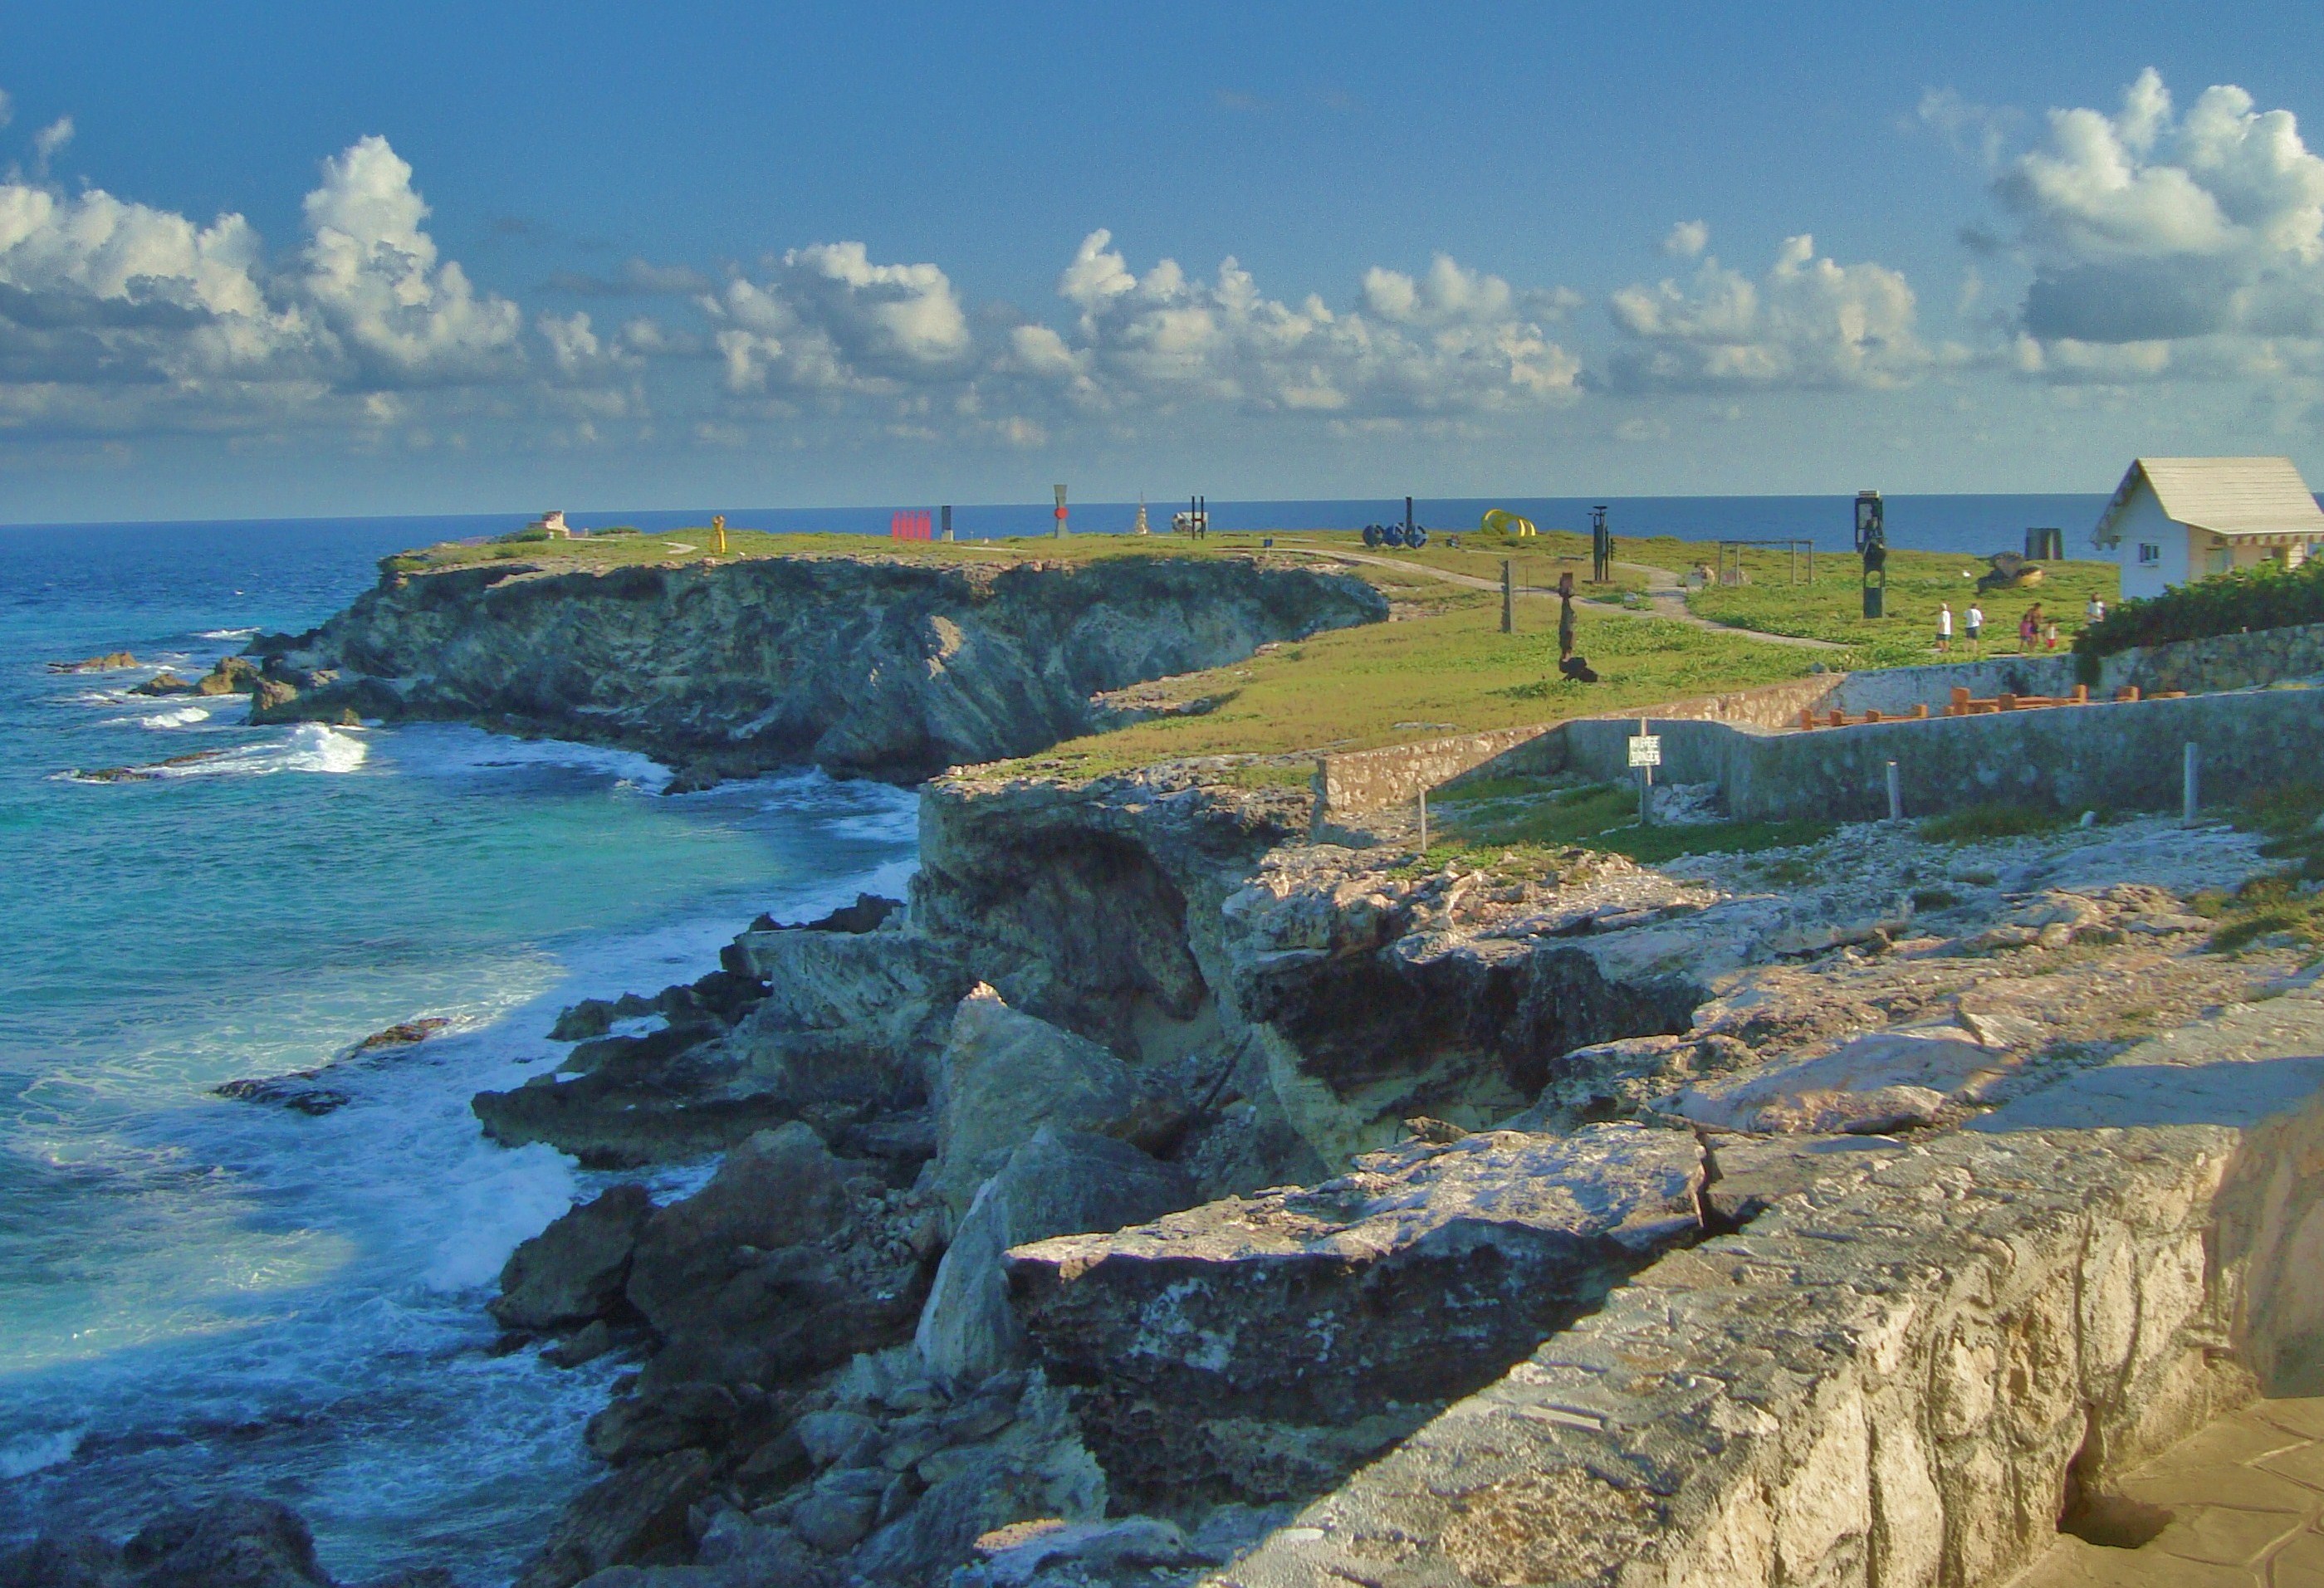 isla mujeres excursions from cancun